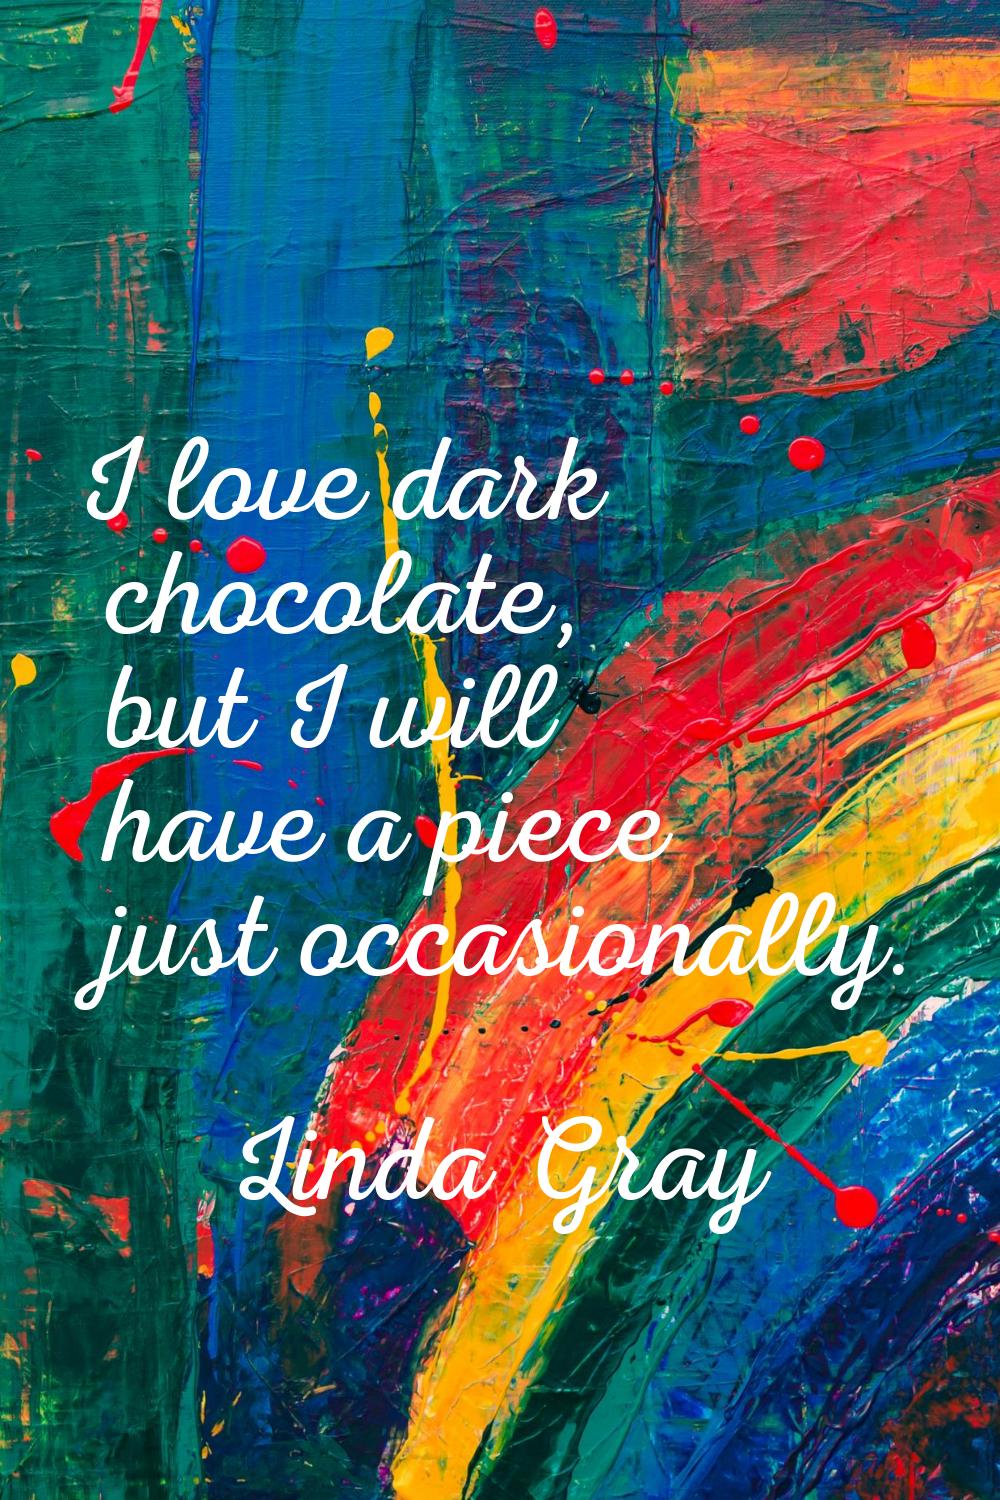 I love dark chocolate, but I will have a piece just occasionally.